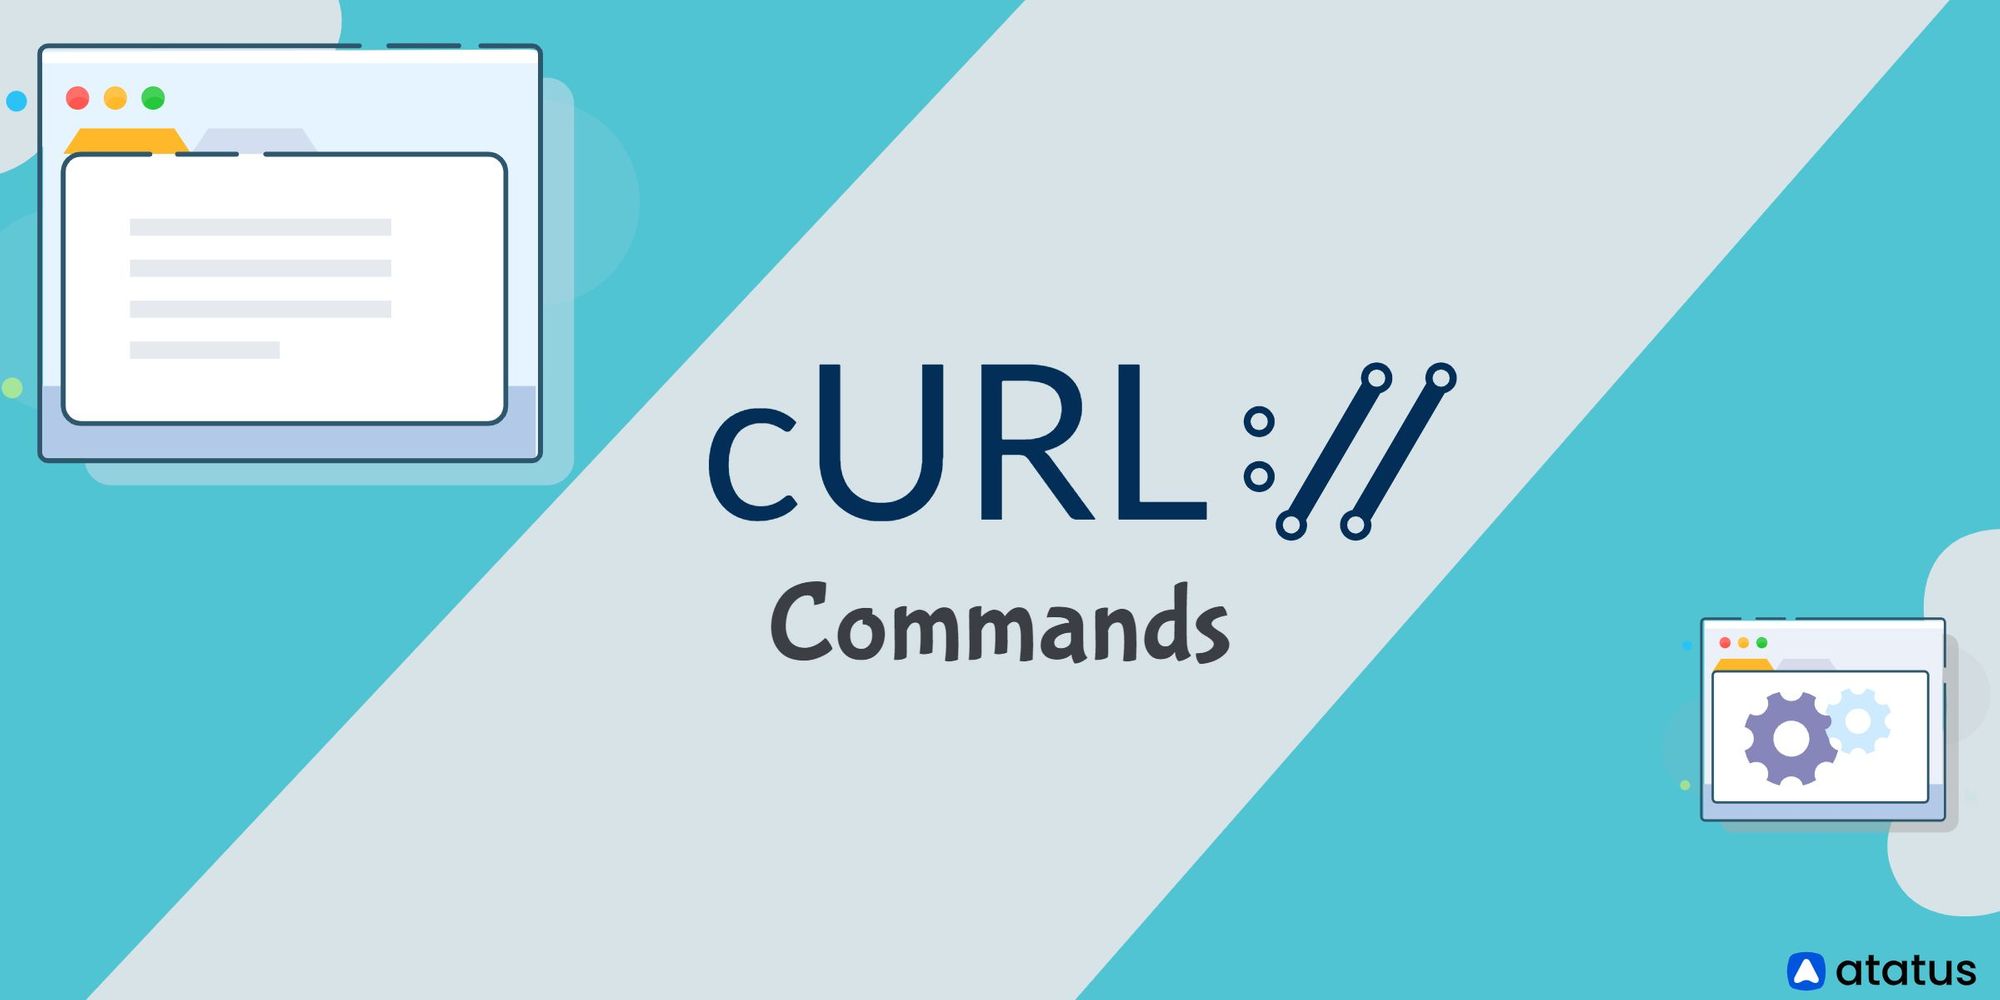 Curl get request example. Php curl get